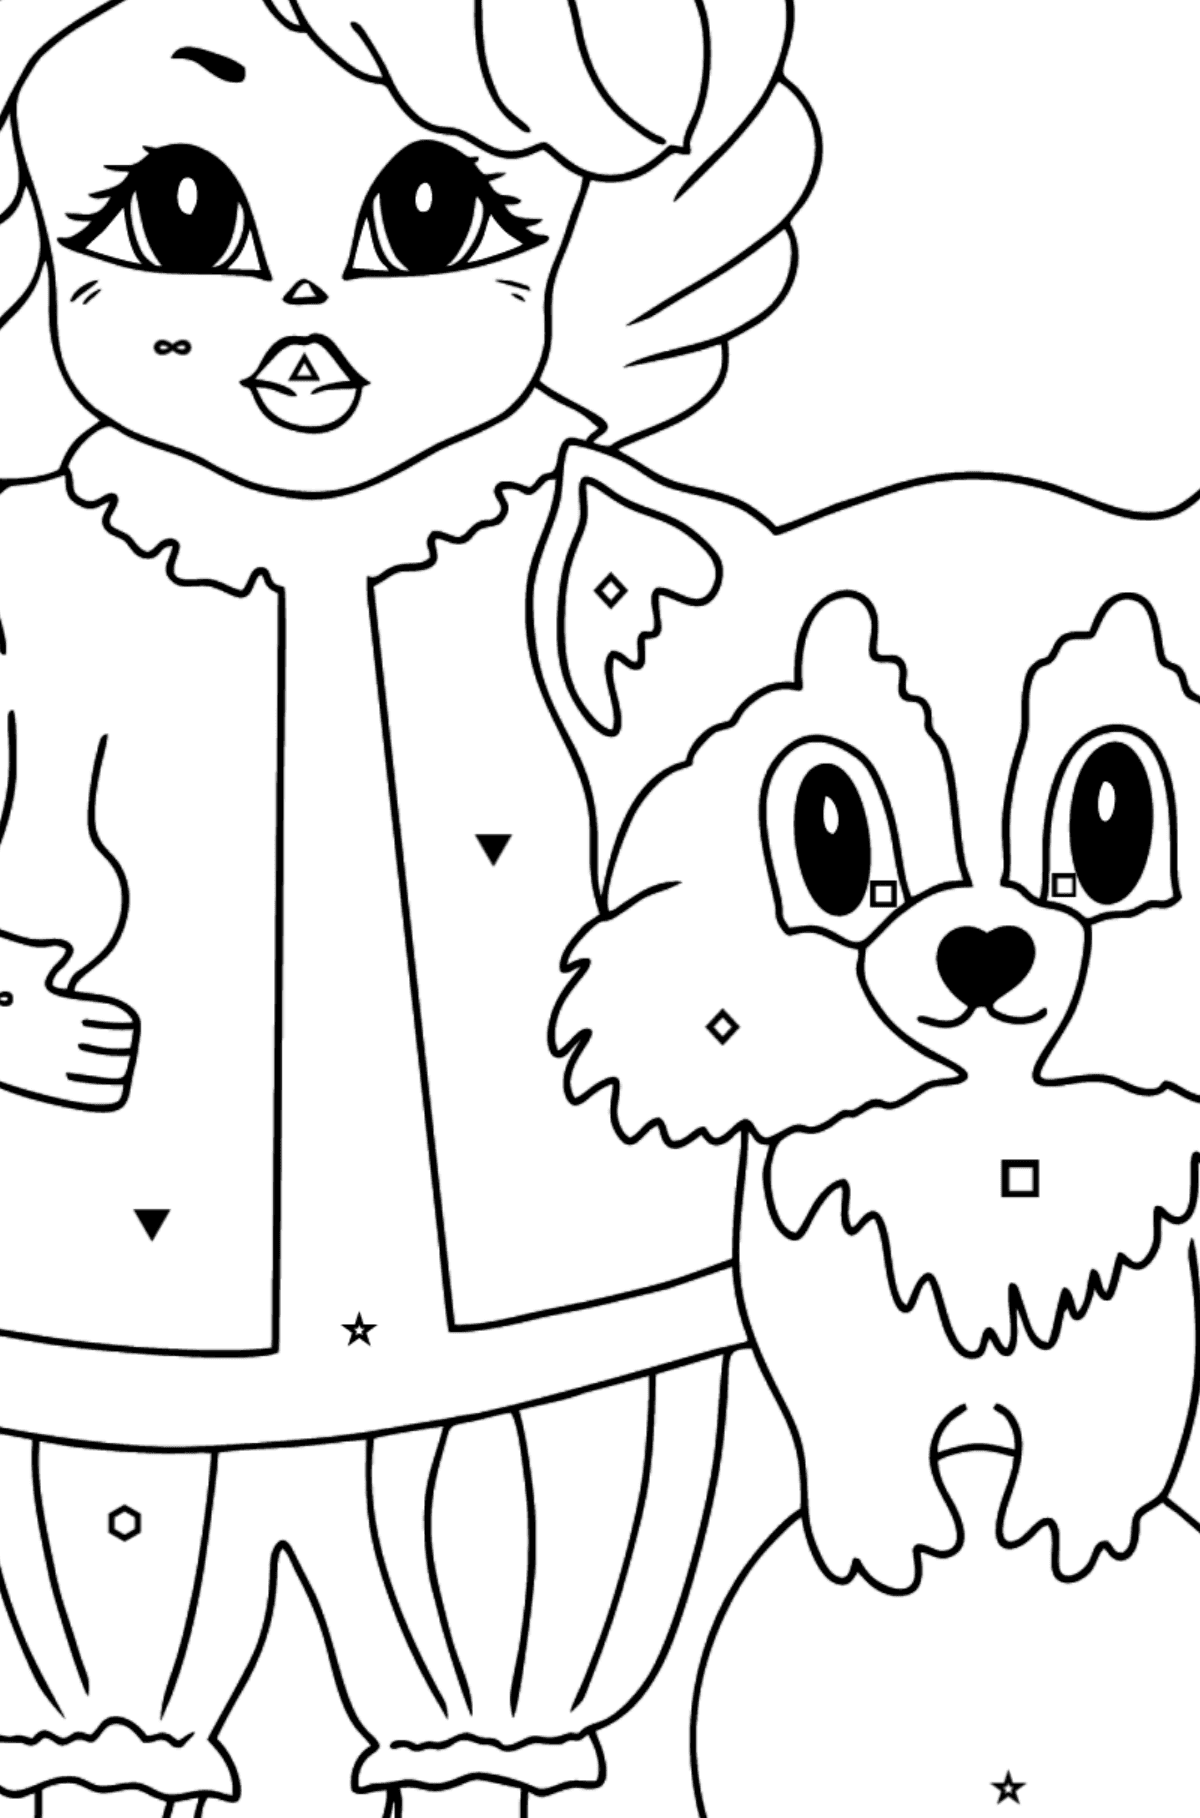 Coloring Picture - A Princess with a Cat and a Racoon - Coloring by Symbols and Geometric Shapes for Kids